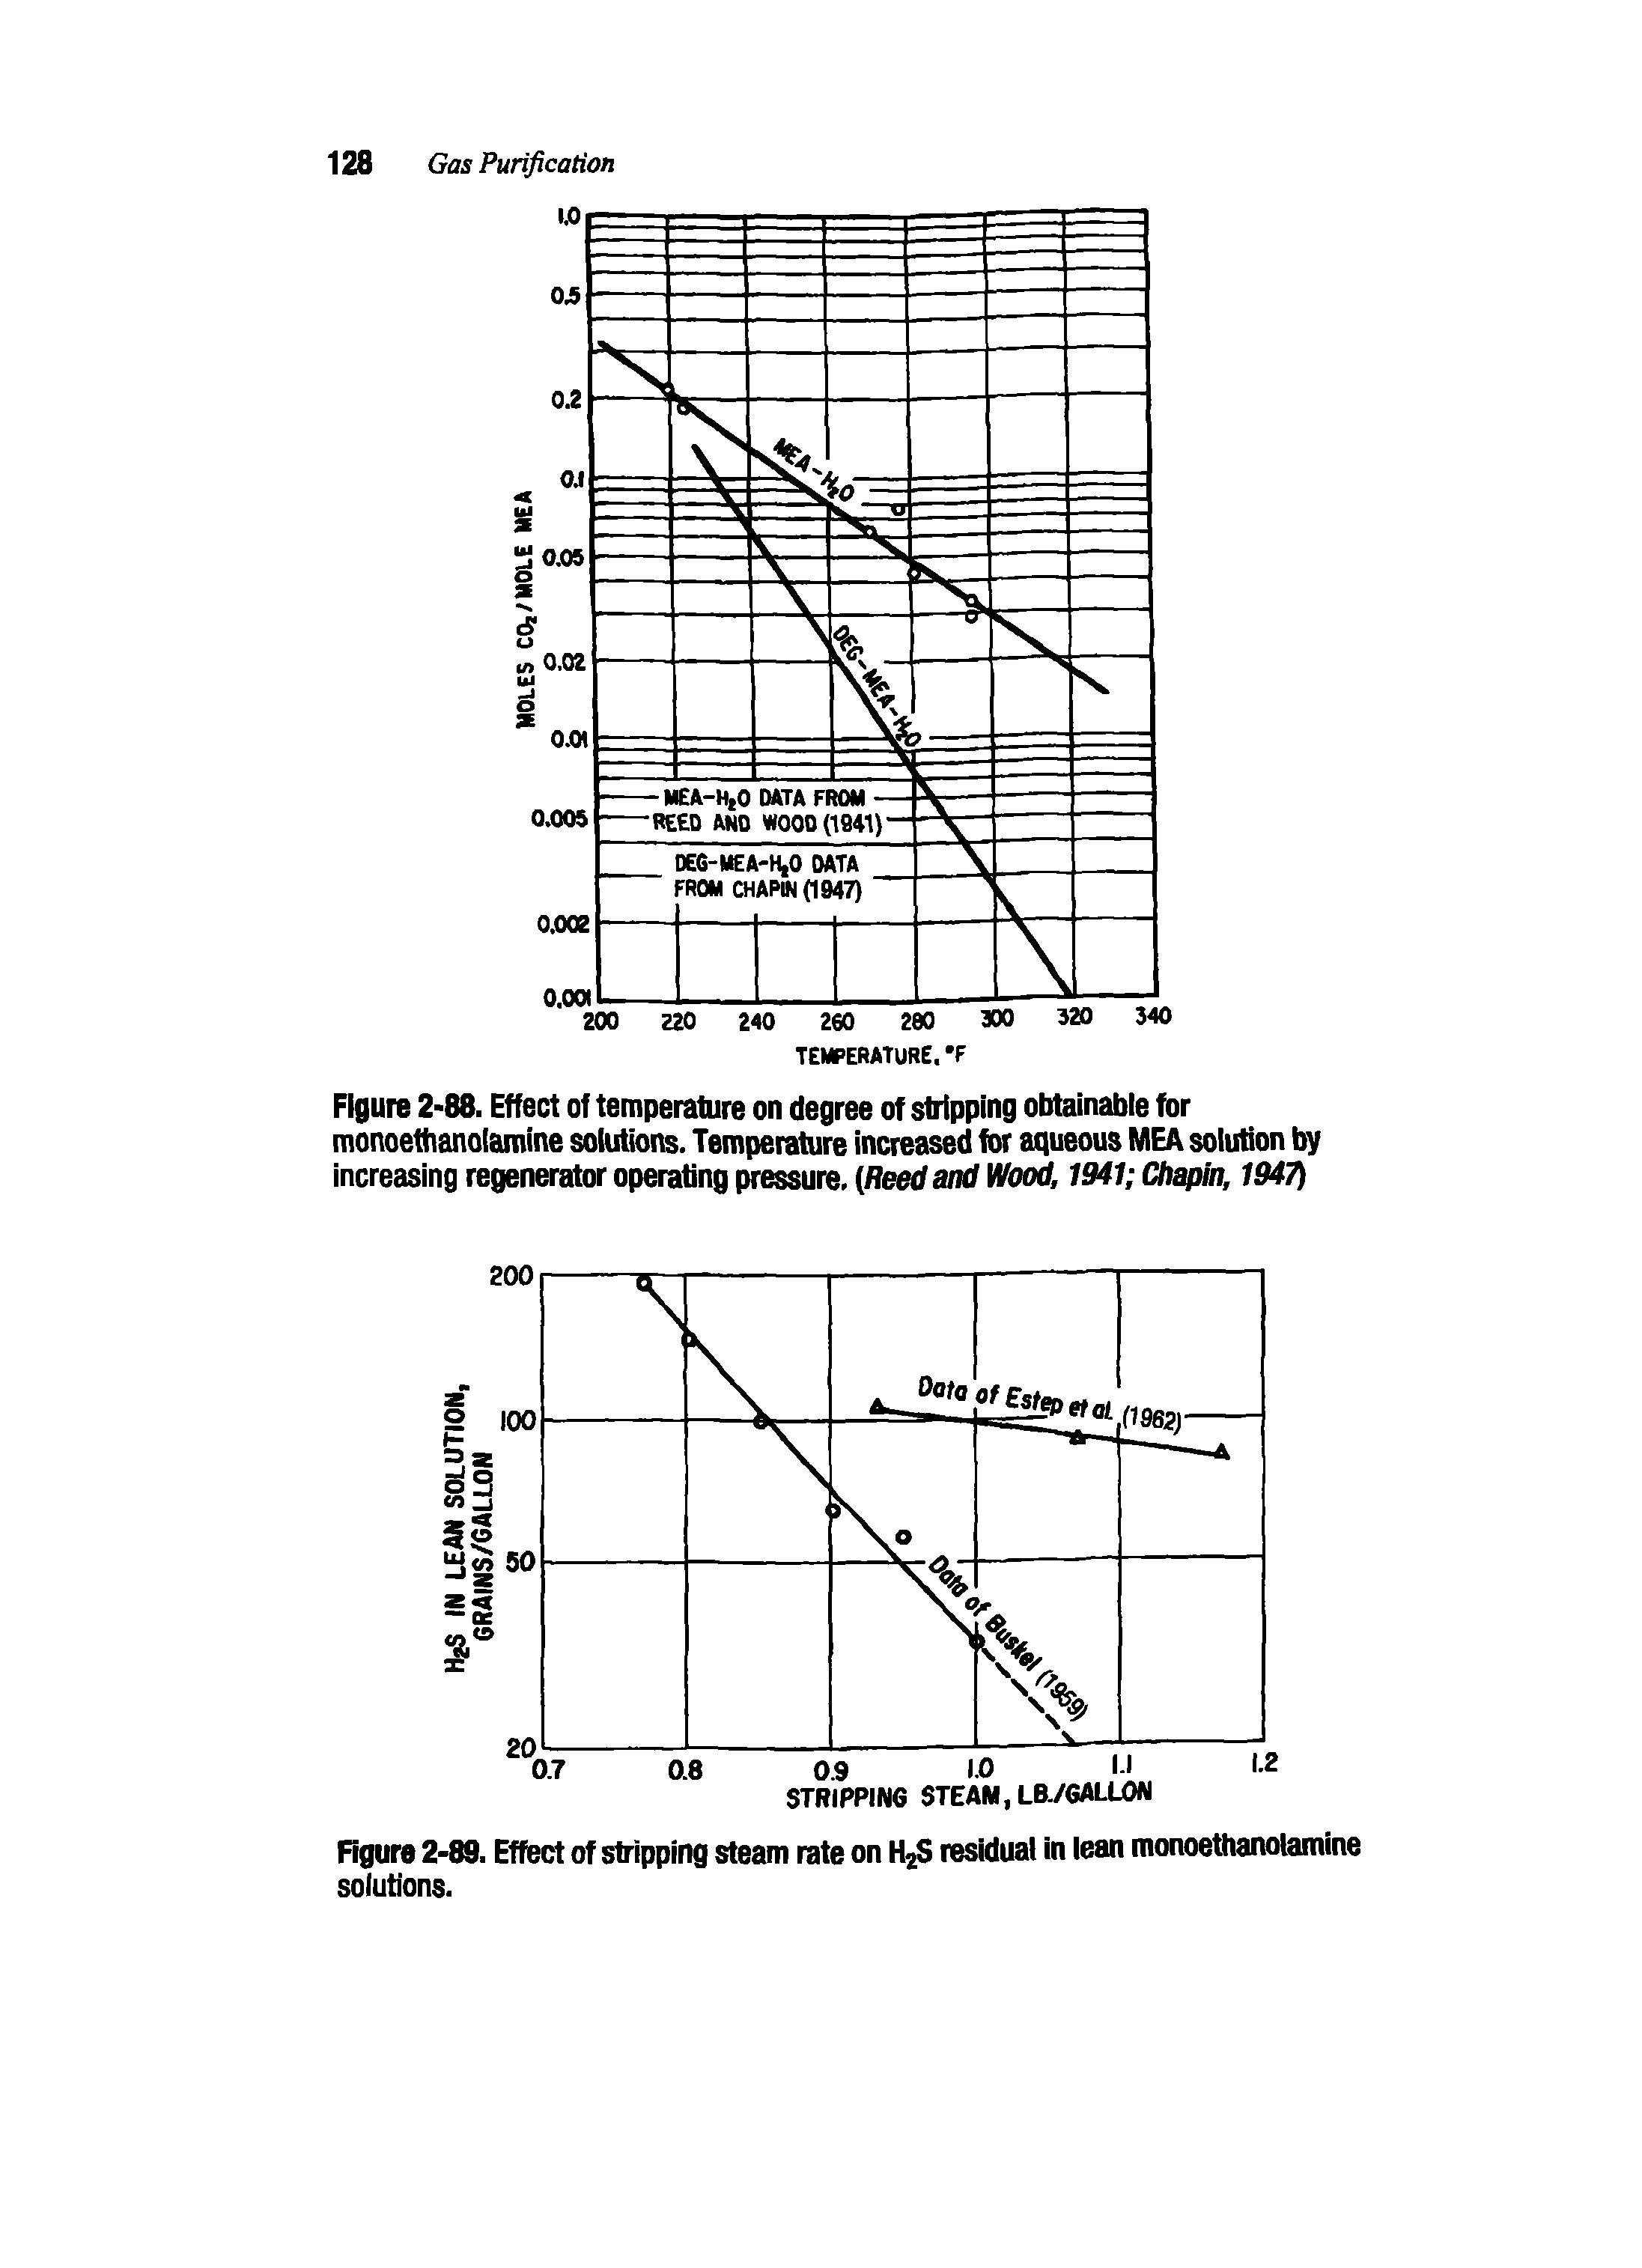 Figure 2>88. Effect of temperature on degree of stripping obtainable for monoetbanolamine sotuUons. Temperature increased for aqueous MEA solution by increasing regenerator operating pressure, Reheard HHood, 1941 19471...